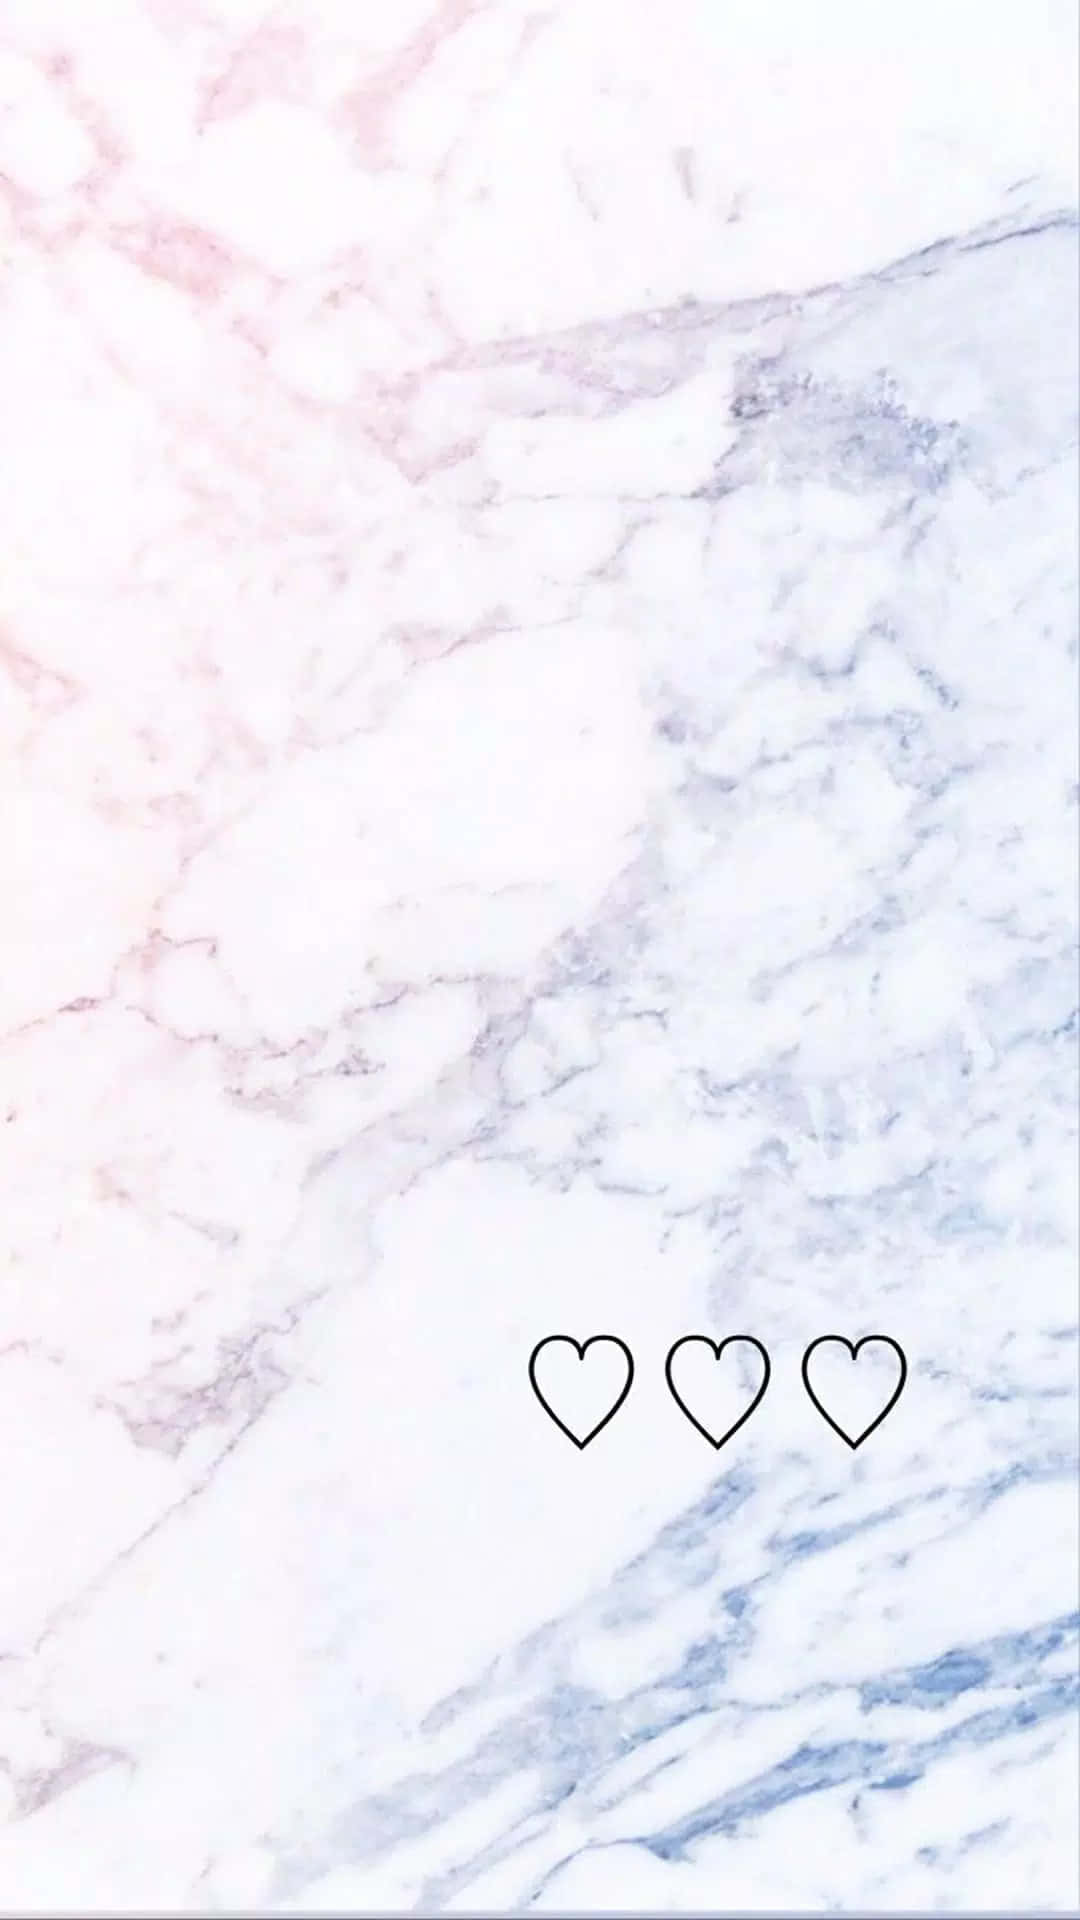 Marble Wallpaper With Hearts On It Wallpaper